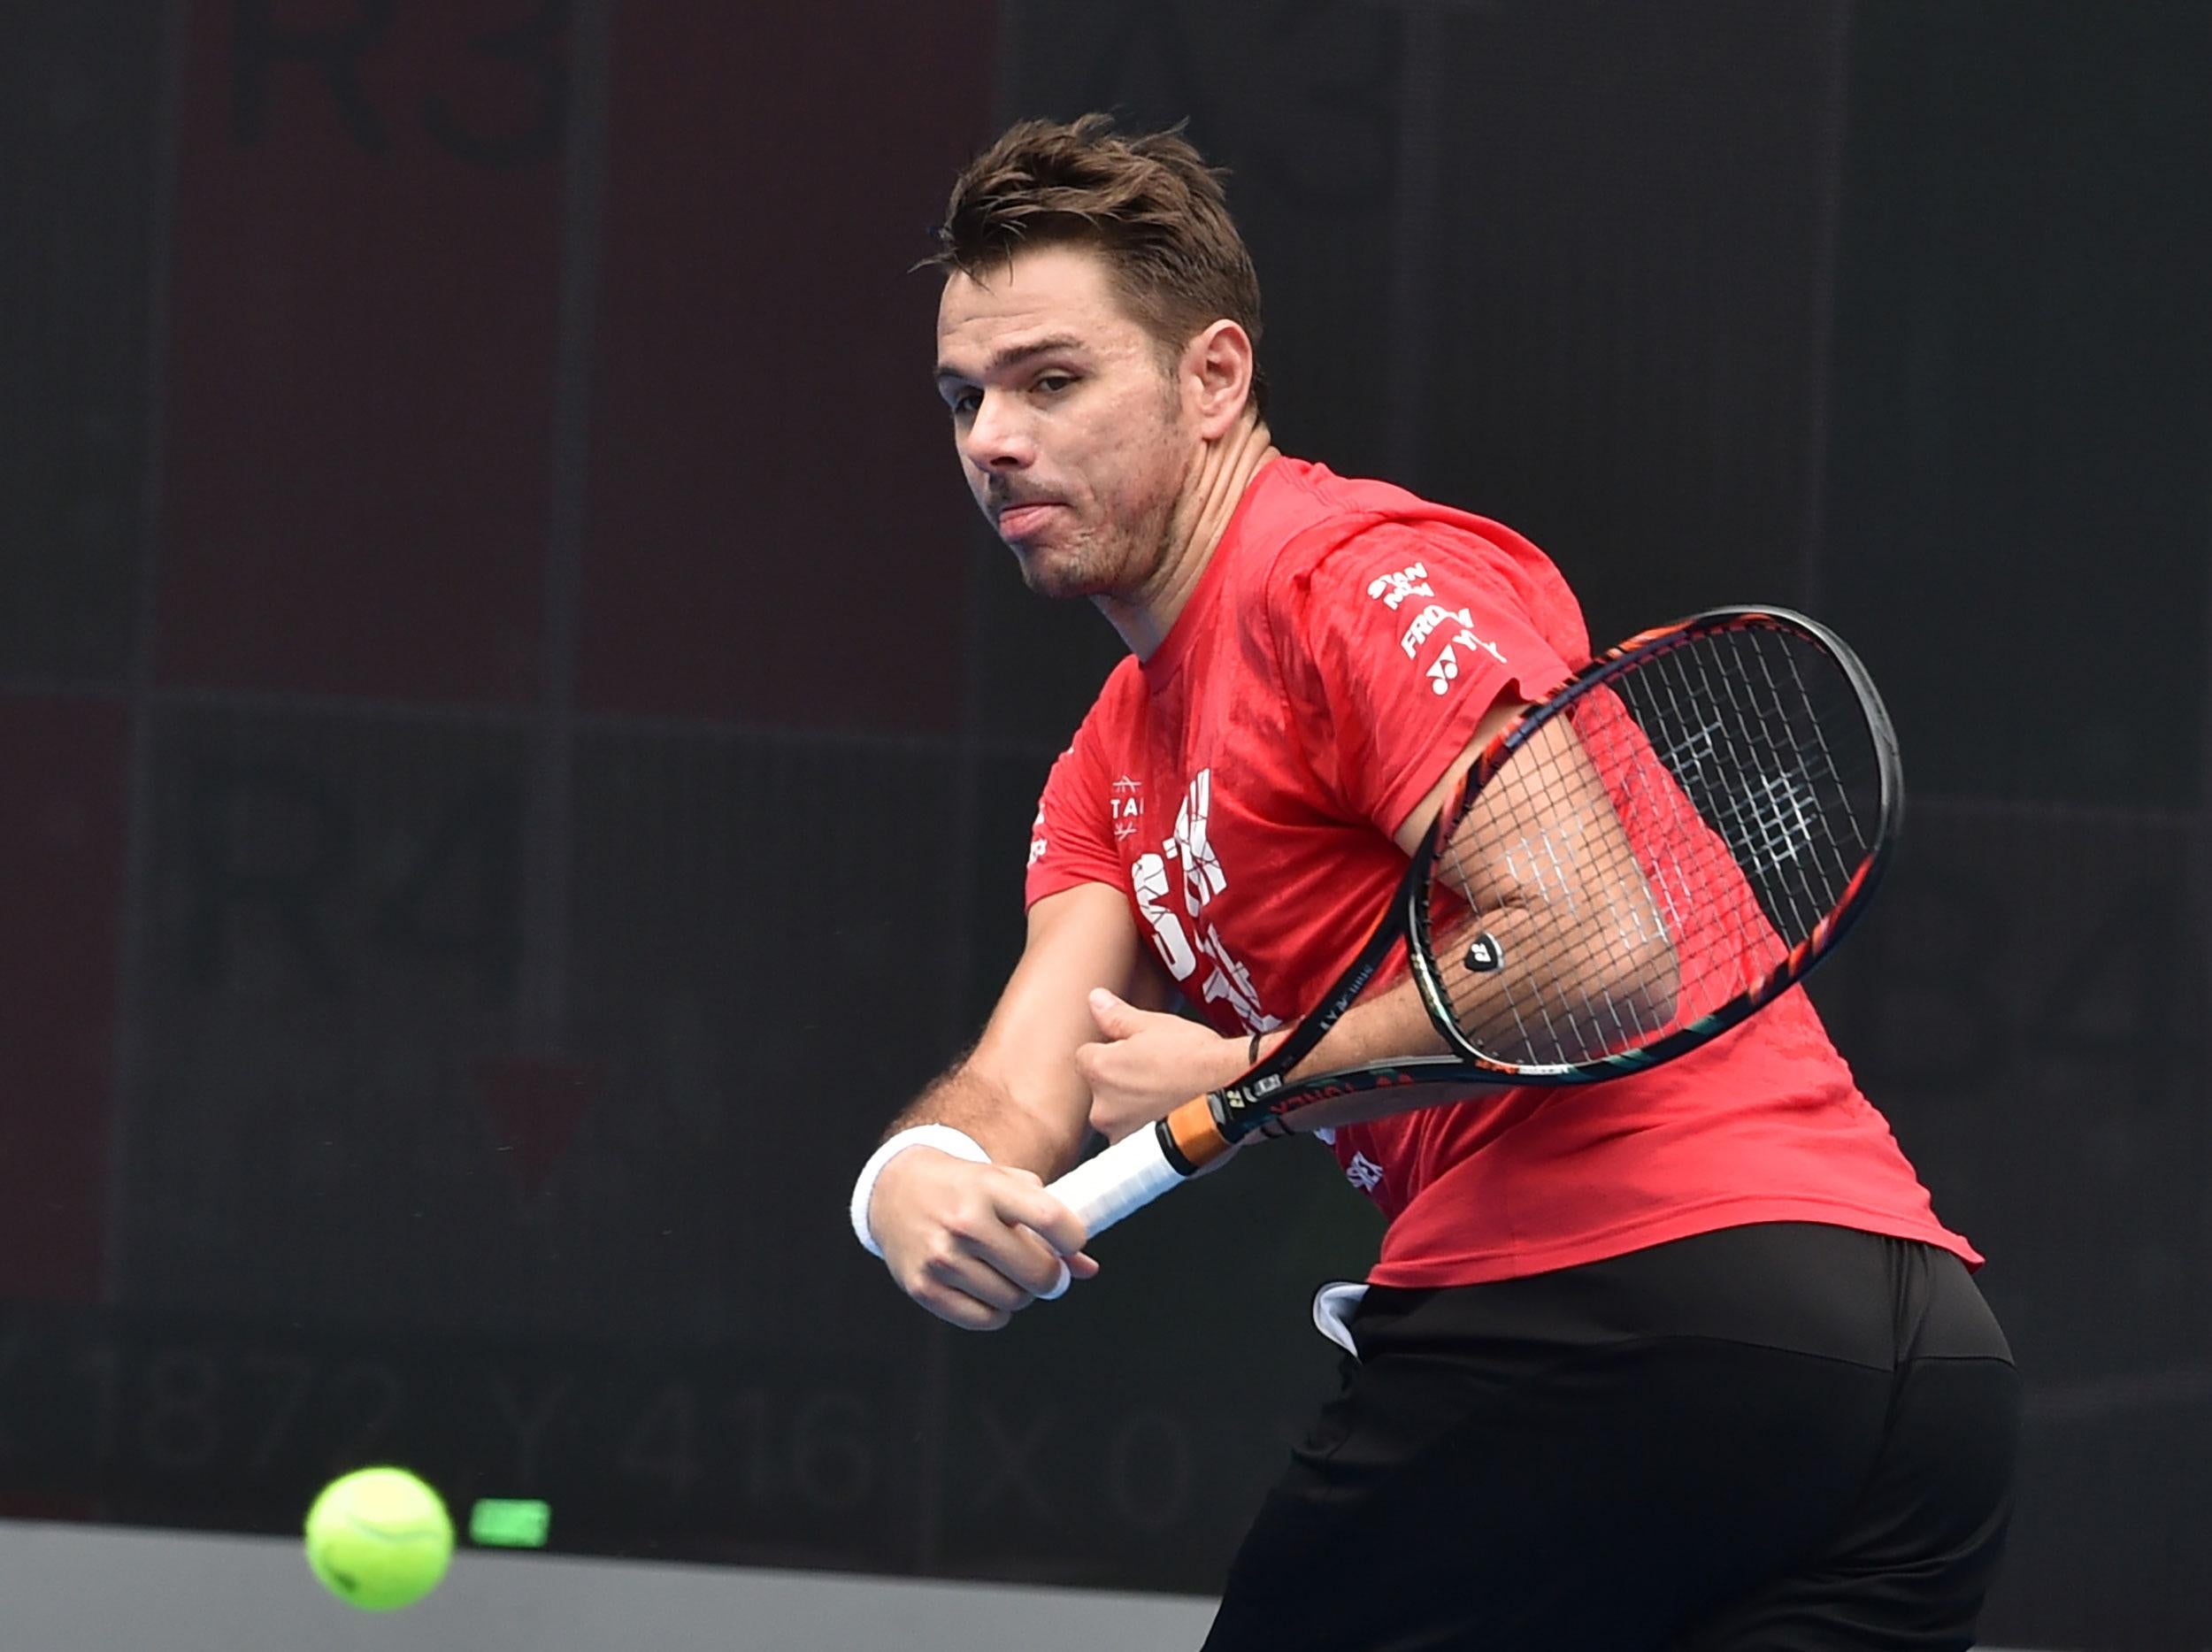 &#13;
Wawrinka will be guided by a new coach in Melbourne &#13;